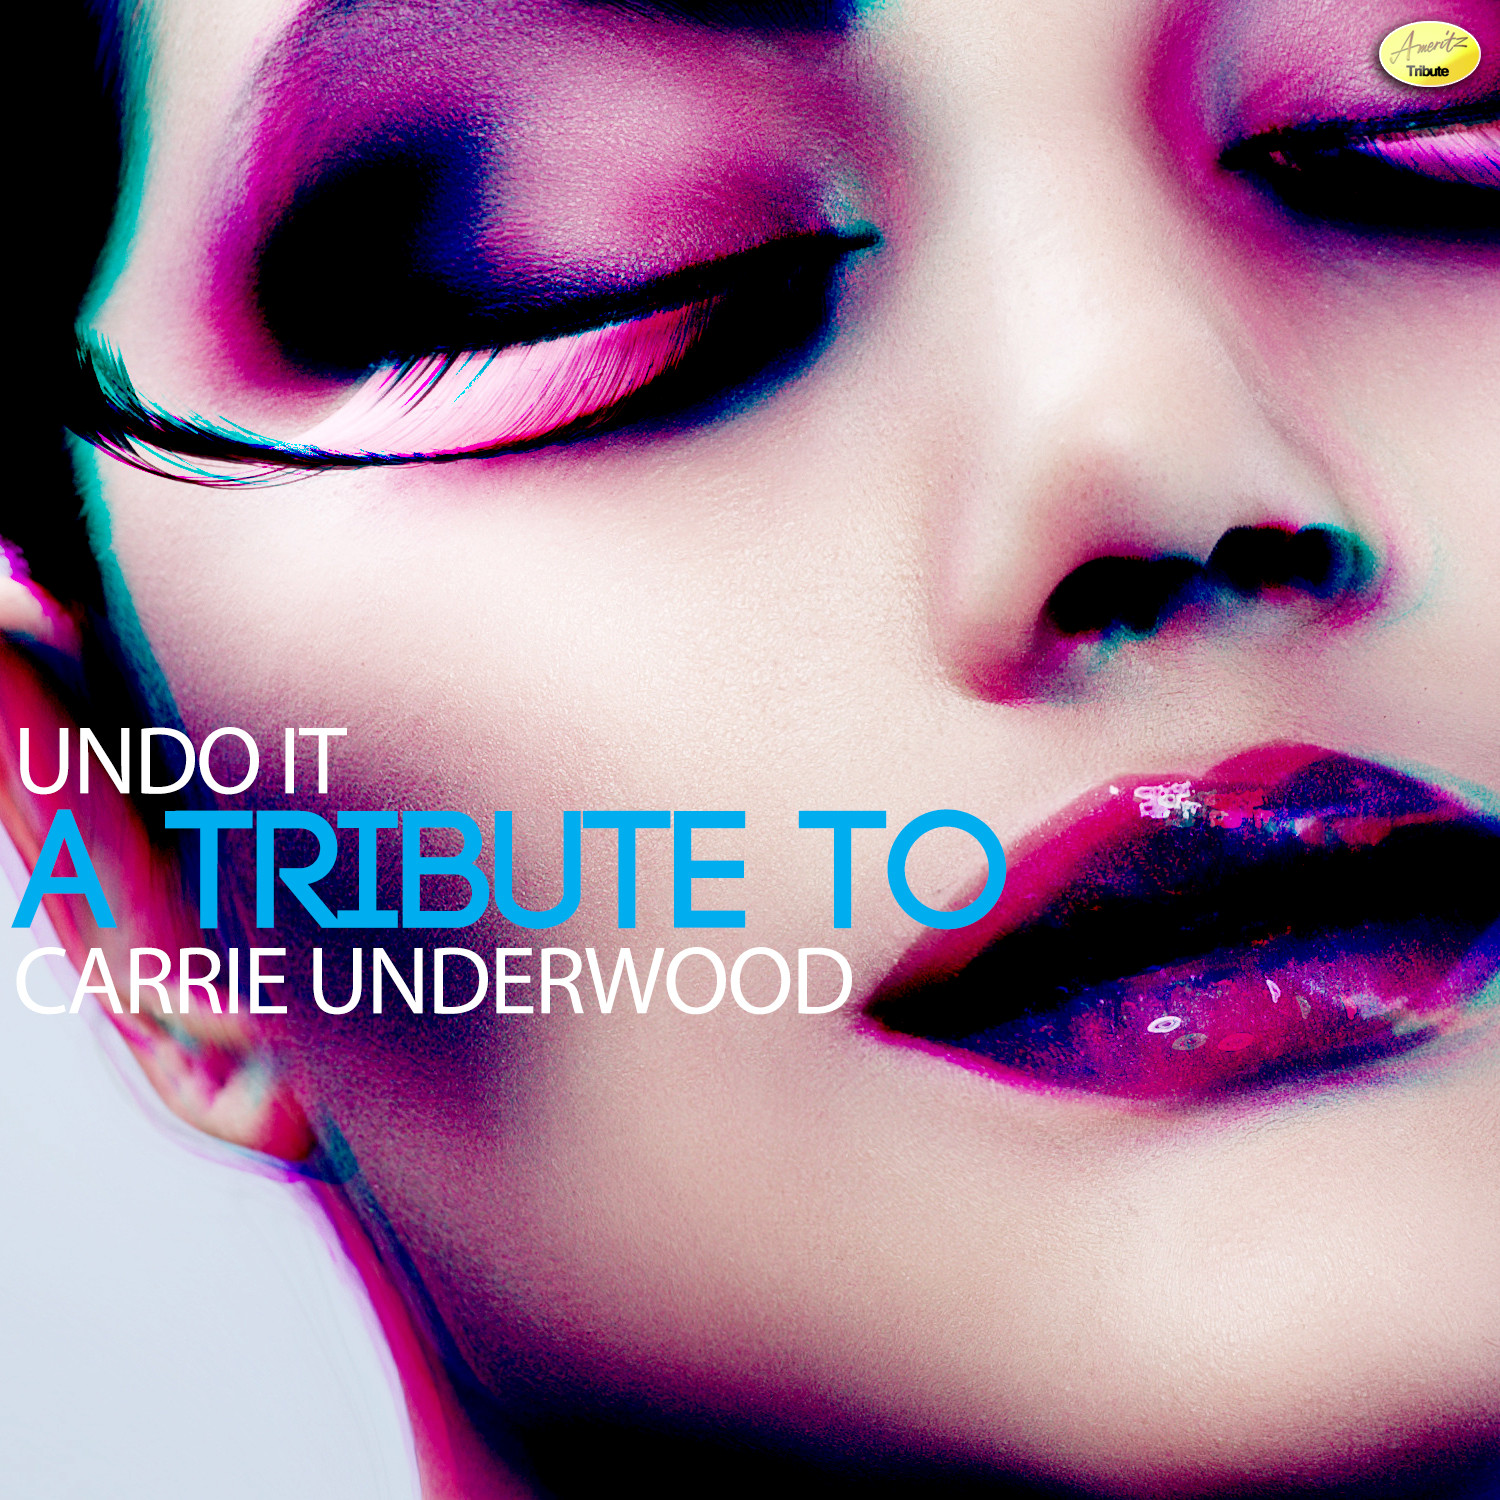 Undo It - A Tribute to Carrie Underwood